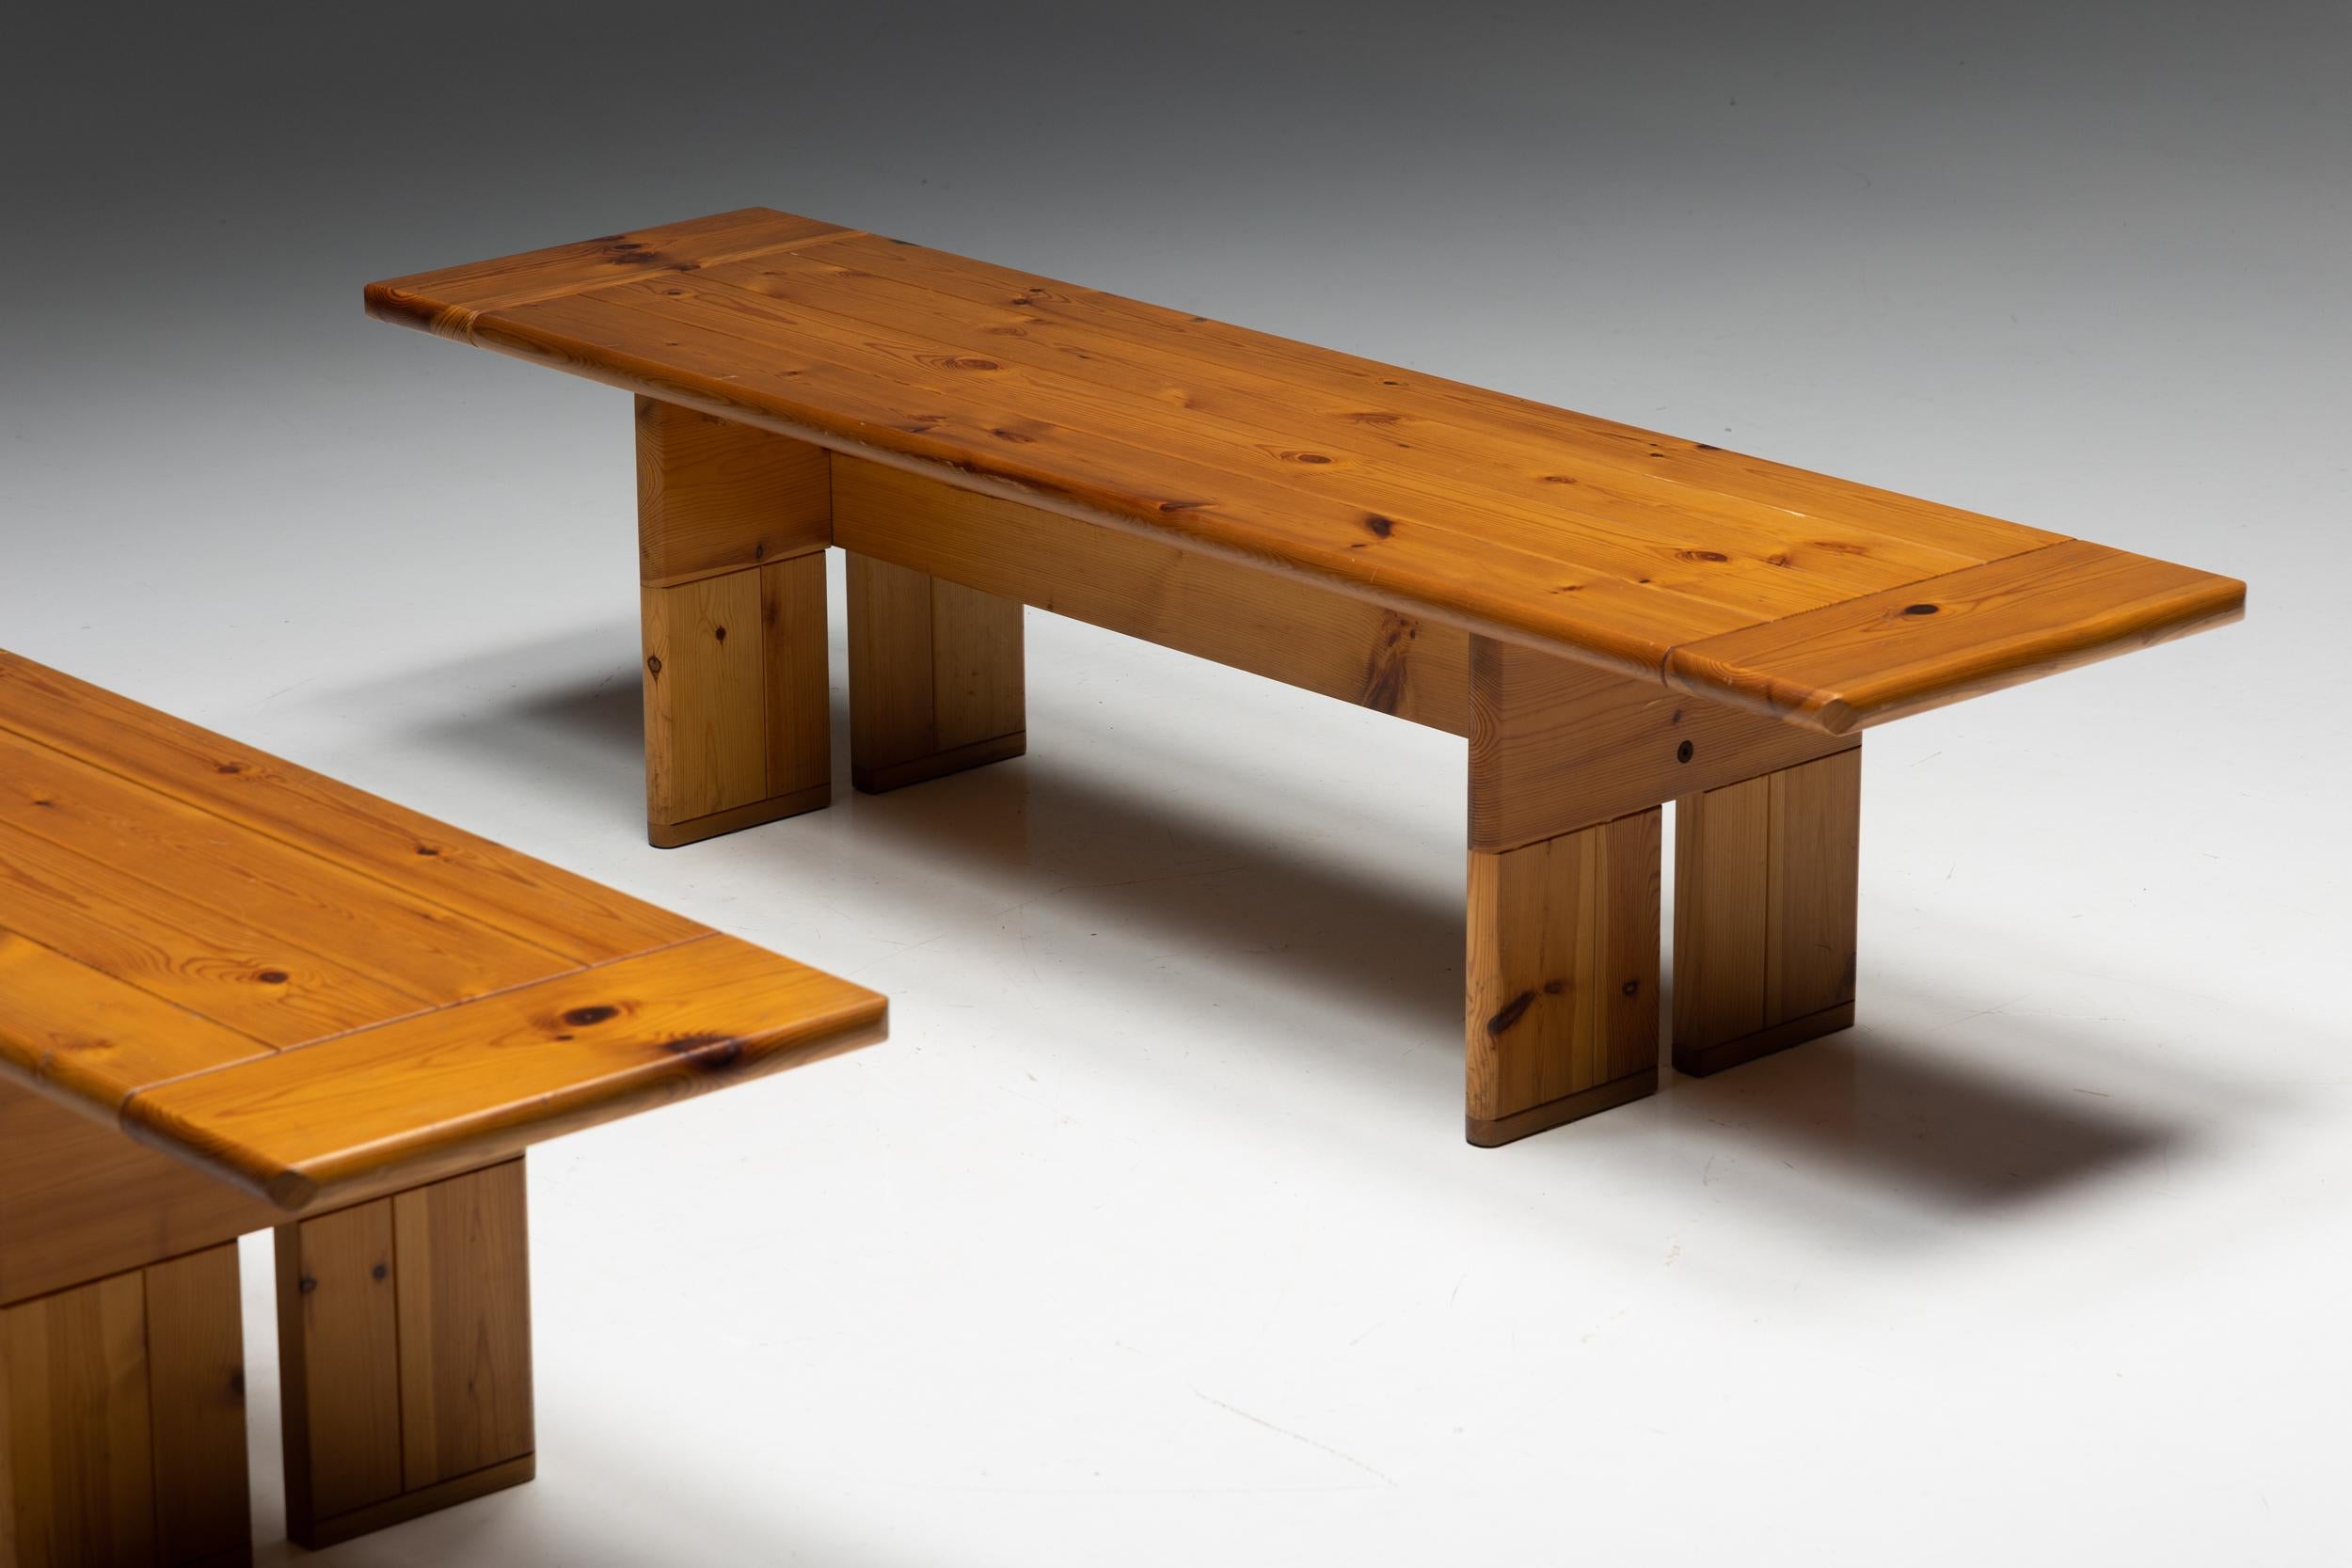 Pine Wood; Bench; Simplicity; Italy; 1970s; Fratelli Montina; Silvio Coppola; Brutalist

Brutalist solid pine wood bench designed by Silvio Coppola for Fretelli Montina. A stunning example of minimalist design from 1970s Italy. Made from pine